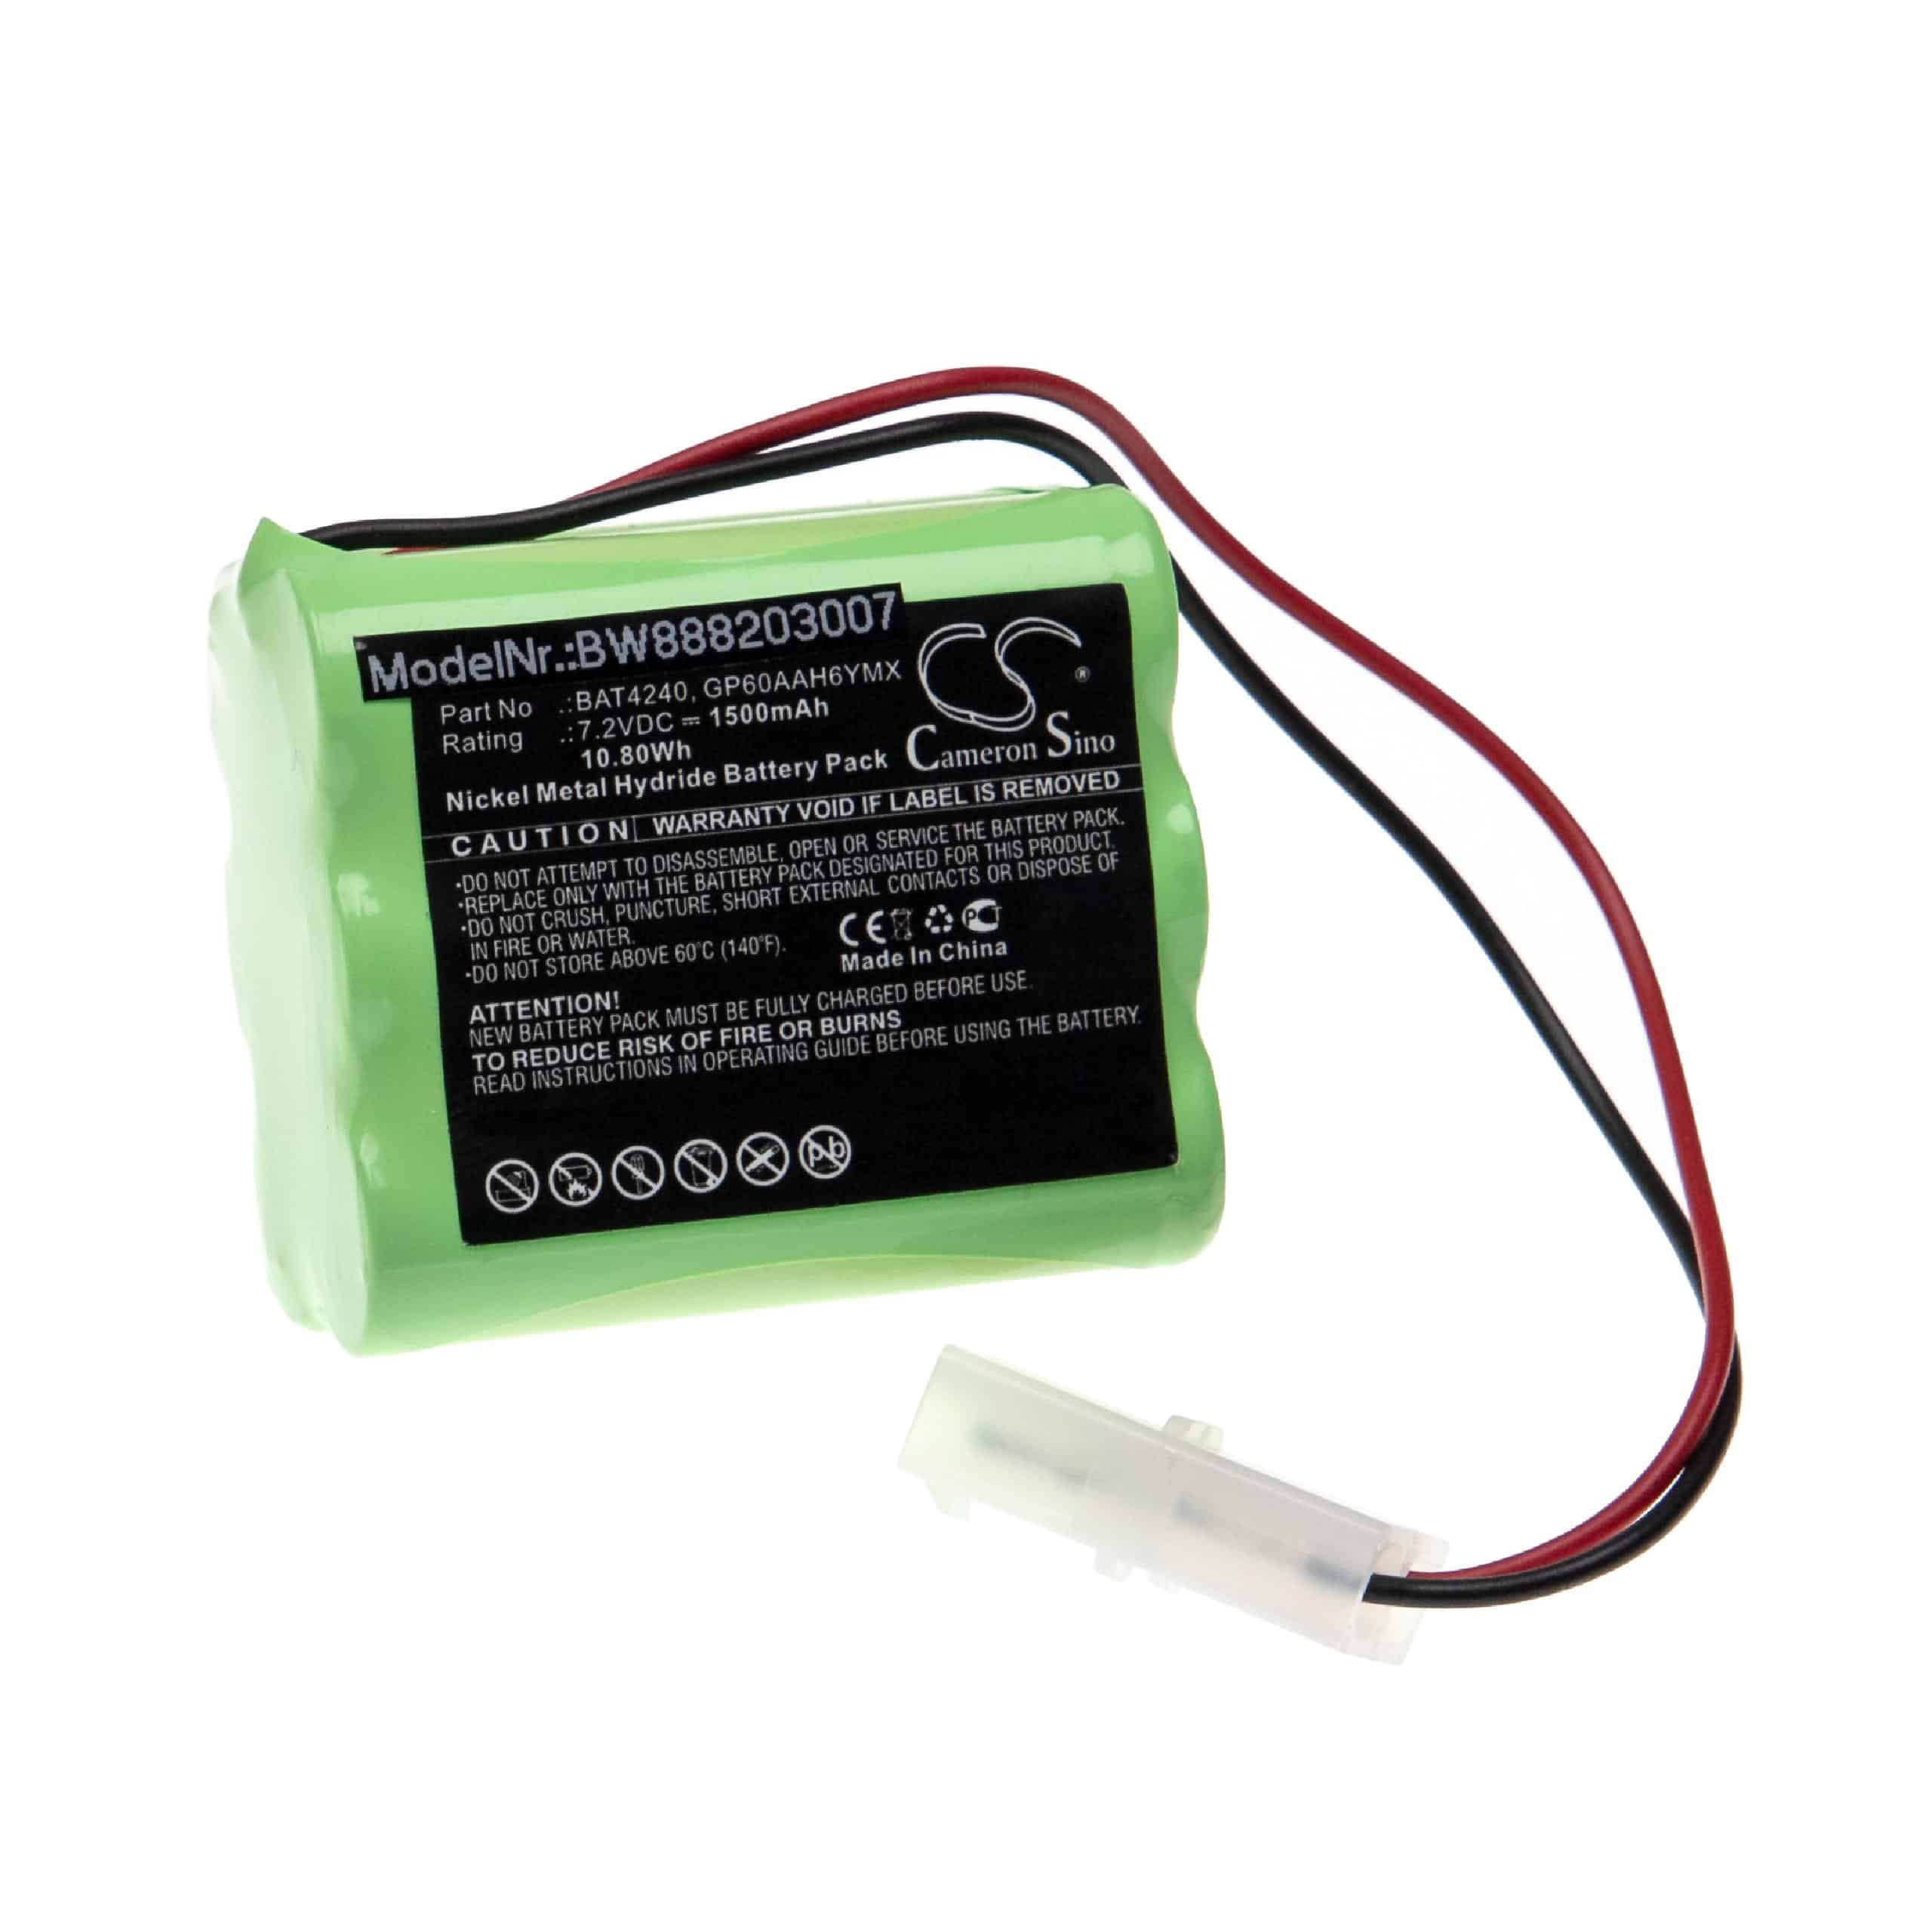 Electric Fire Battery Replacement for Burley BAT4240, GP60AAH6YMX - 1500mAh 7.2V NiMH